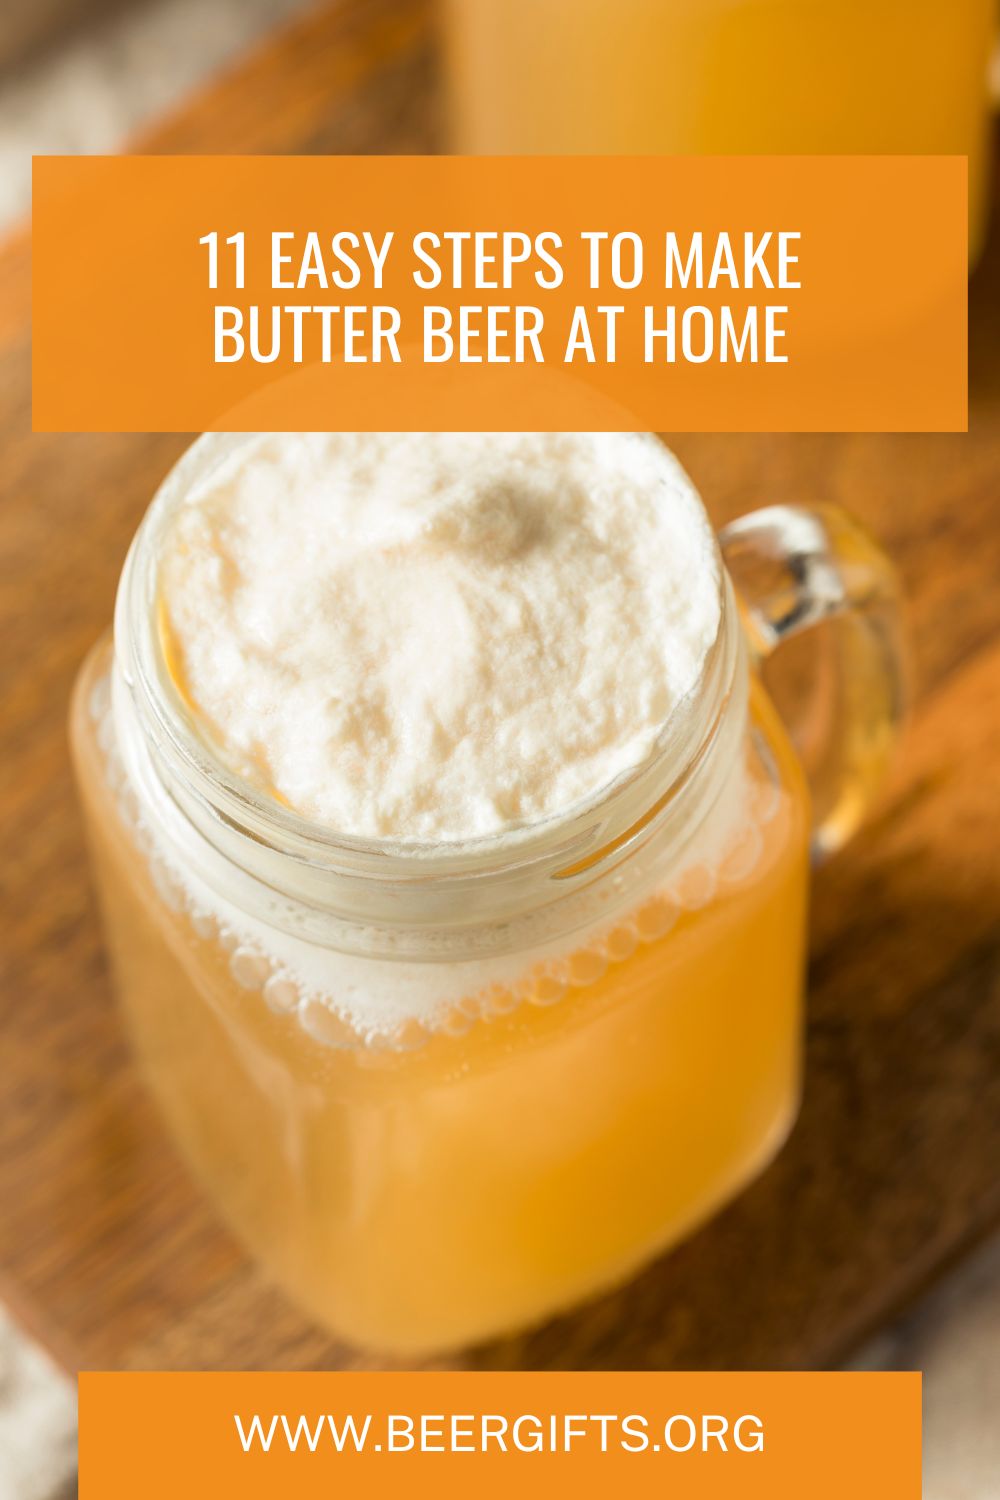 11 Easy Steps To Make Butter Beer At Home12